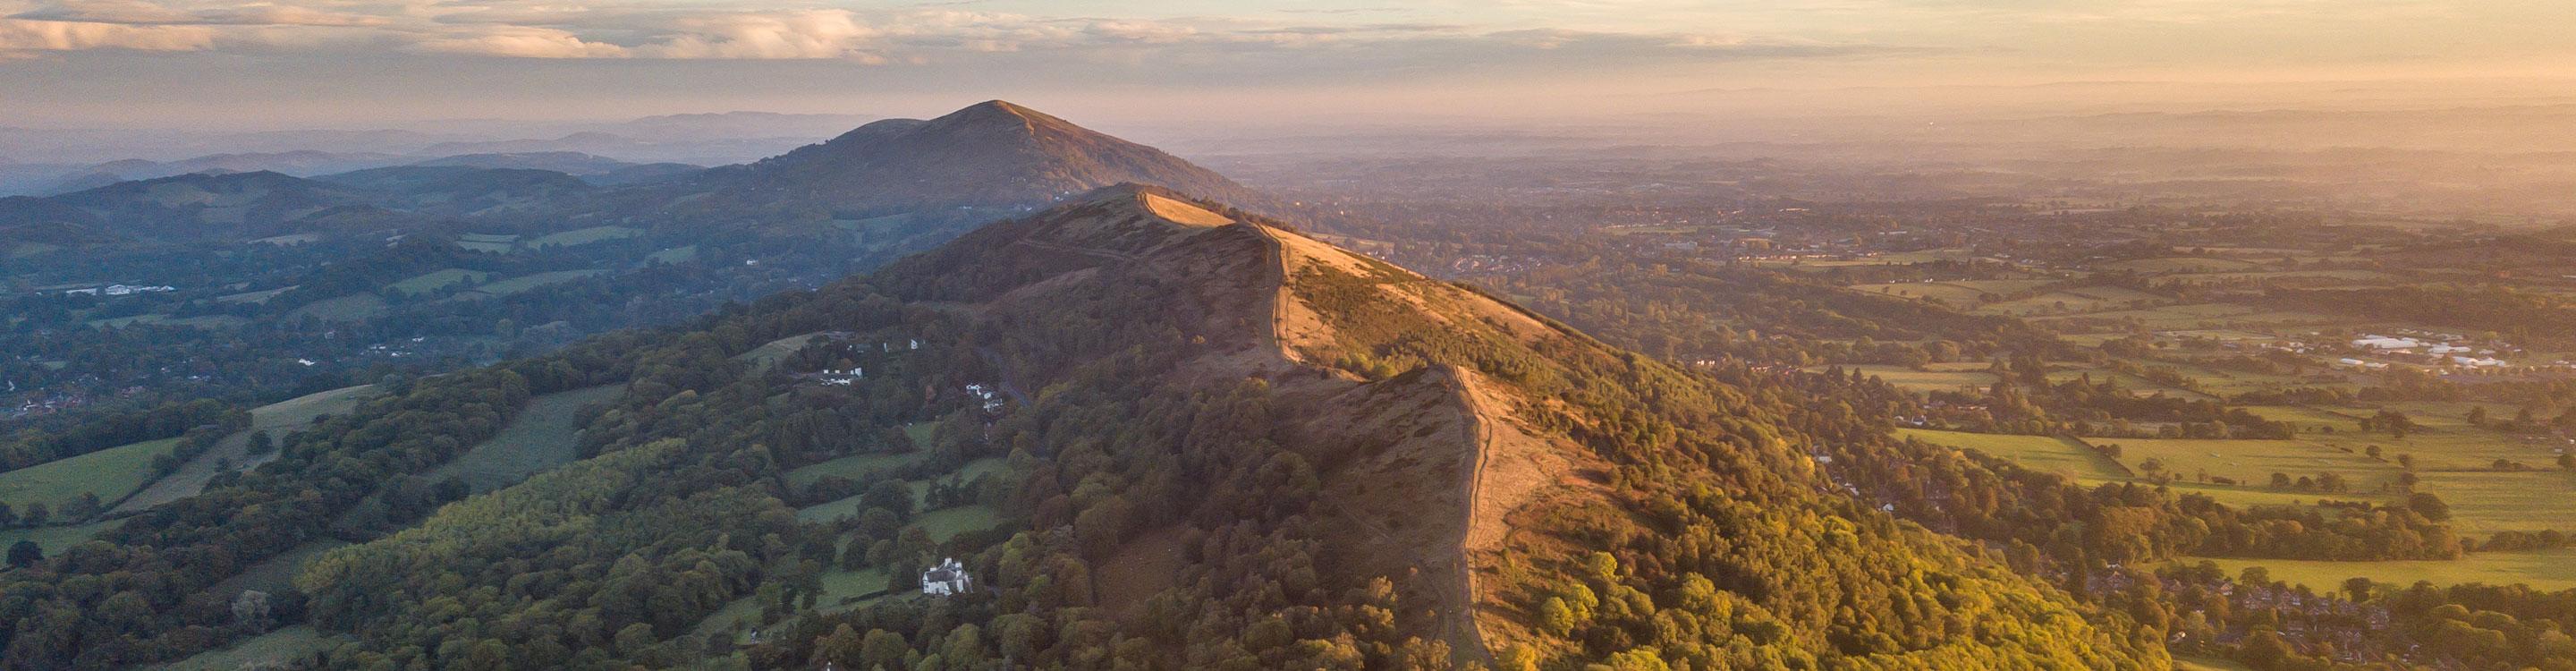 Aerial view overlooking the Malvern Hills, UK, at Sunrise